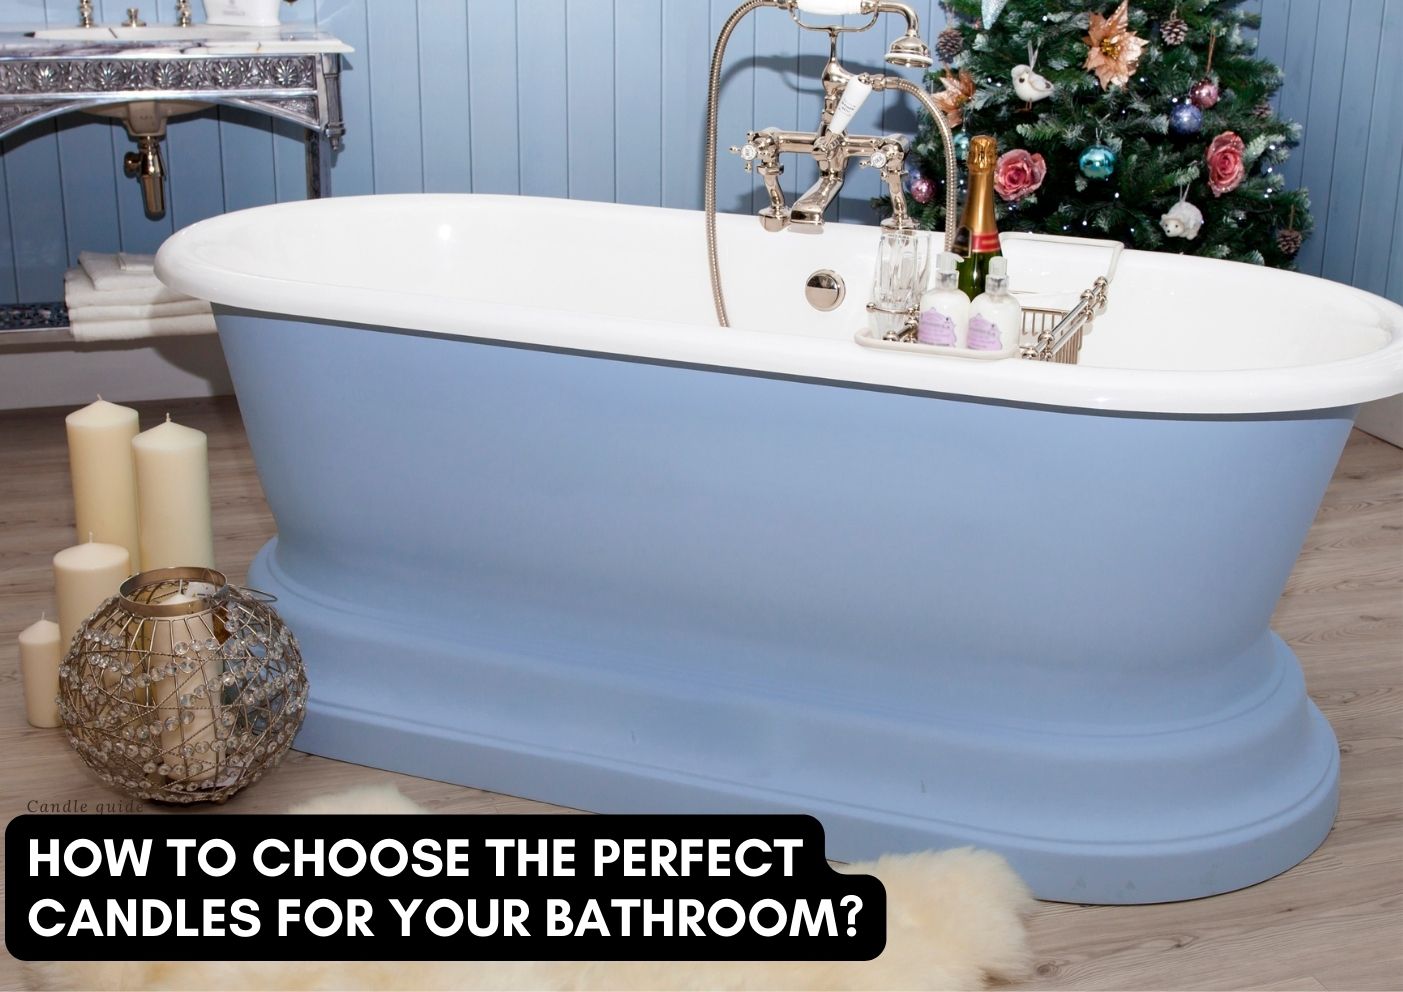 How to choose the perfect candles for your bathroom?